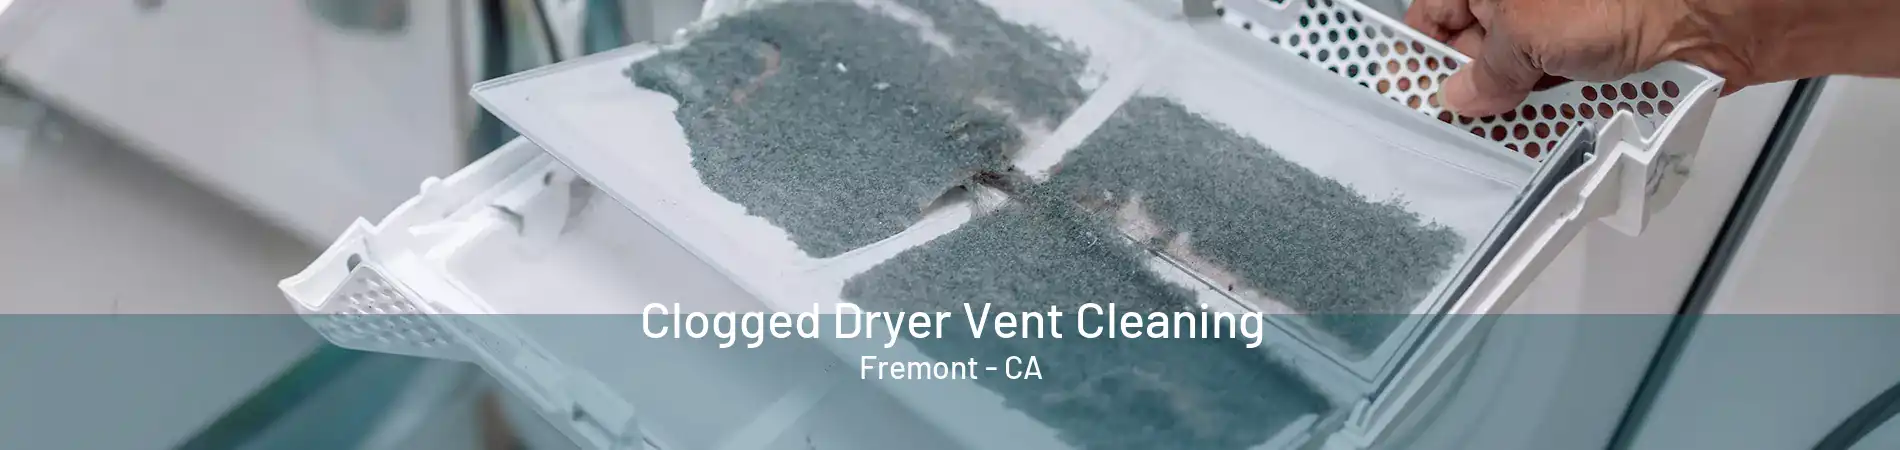 Clogged Dryer Vent Cleaning Fremont - CA